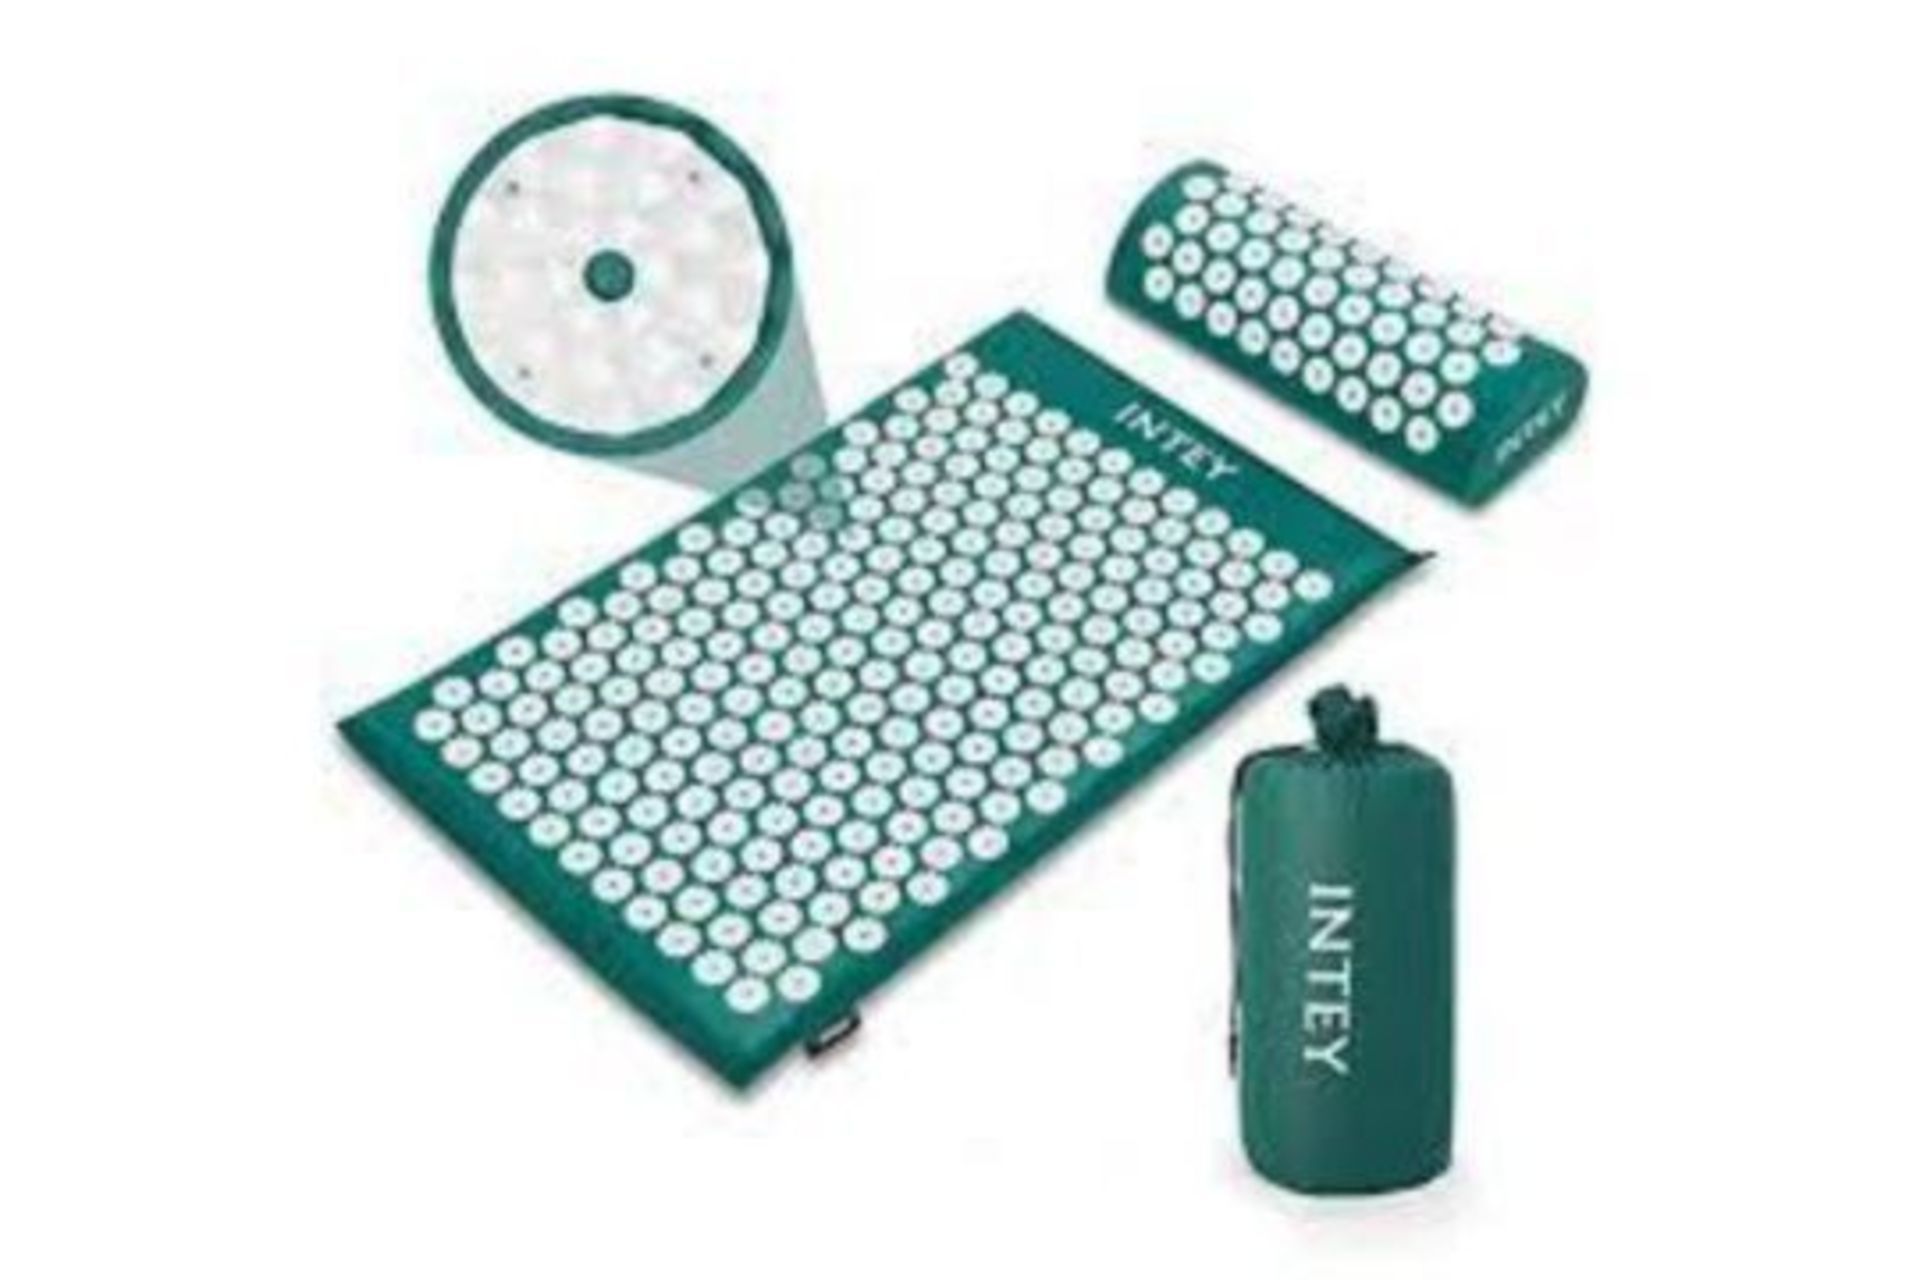 20 X BRAND NEW GREEN PROFESSIONAL ACUPUNCTURE PAD SETS WITH MAT AND PILLOW IN CARRY CASE RRP £30